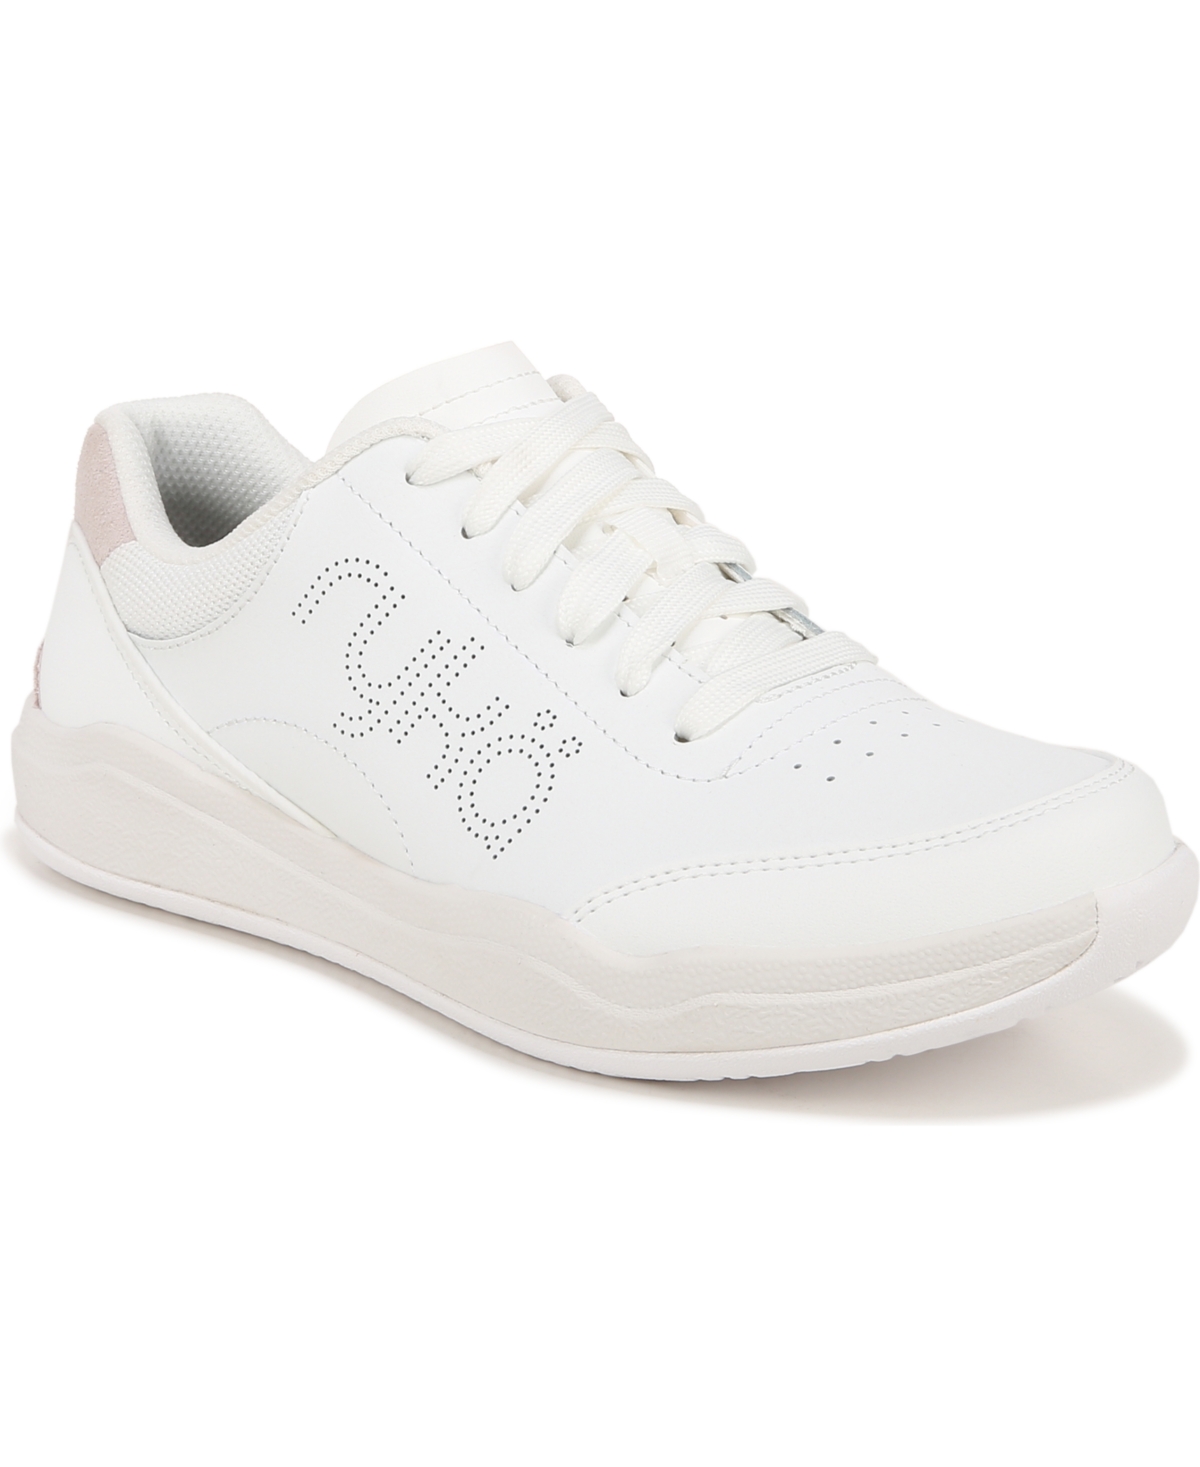 Women's Courtside Pickleball Sneakers - White/Green Leather